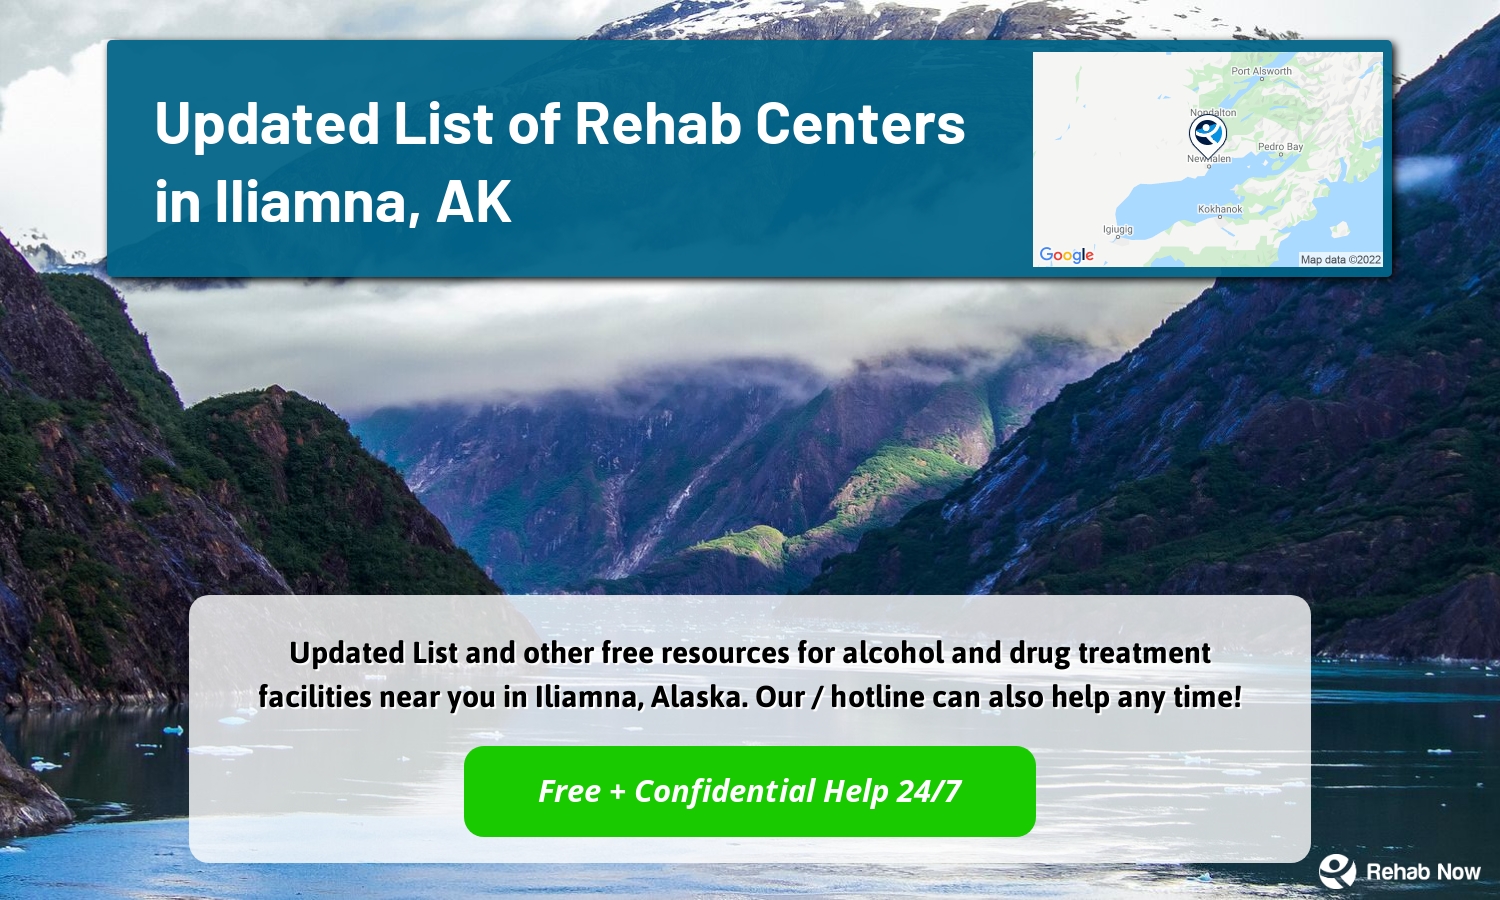  Updated List and other free resources for alcohol and drug treatment facilities near you in Iliamna, Alaska. Our / hotline can also help any time!